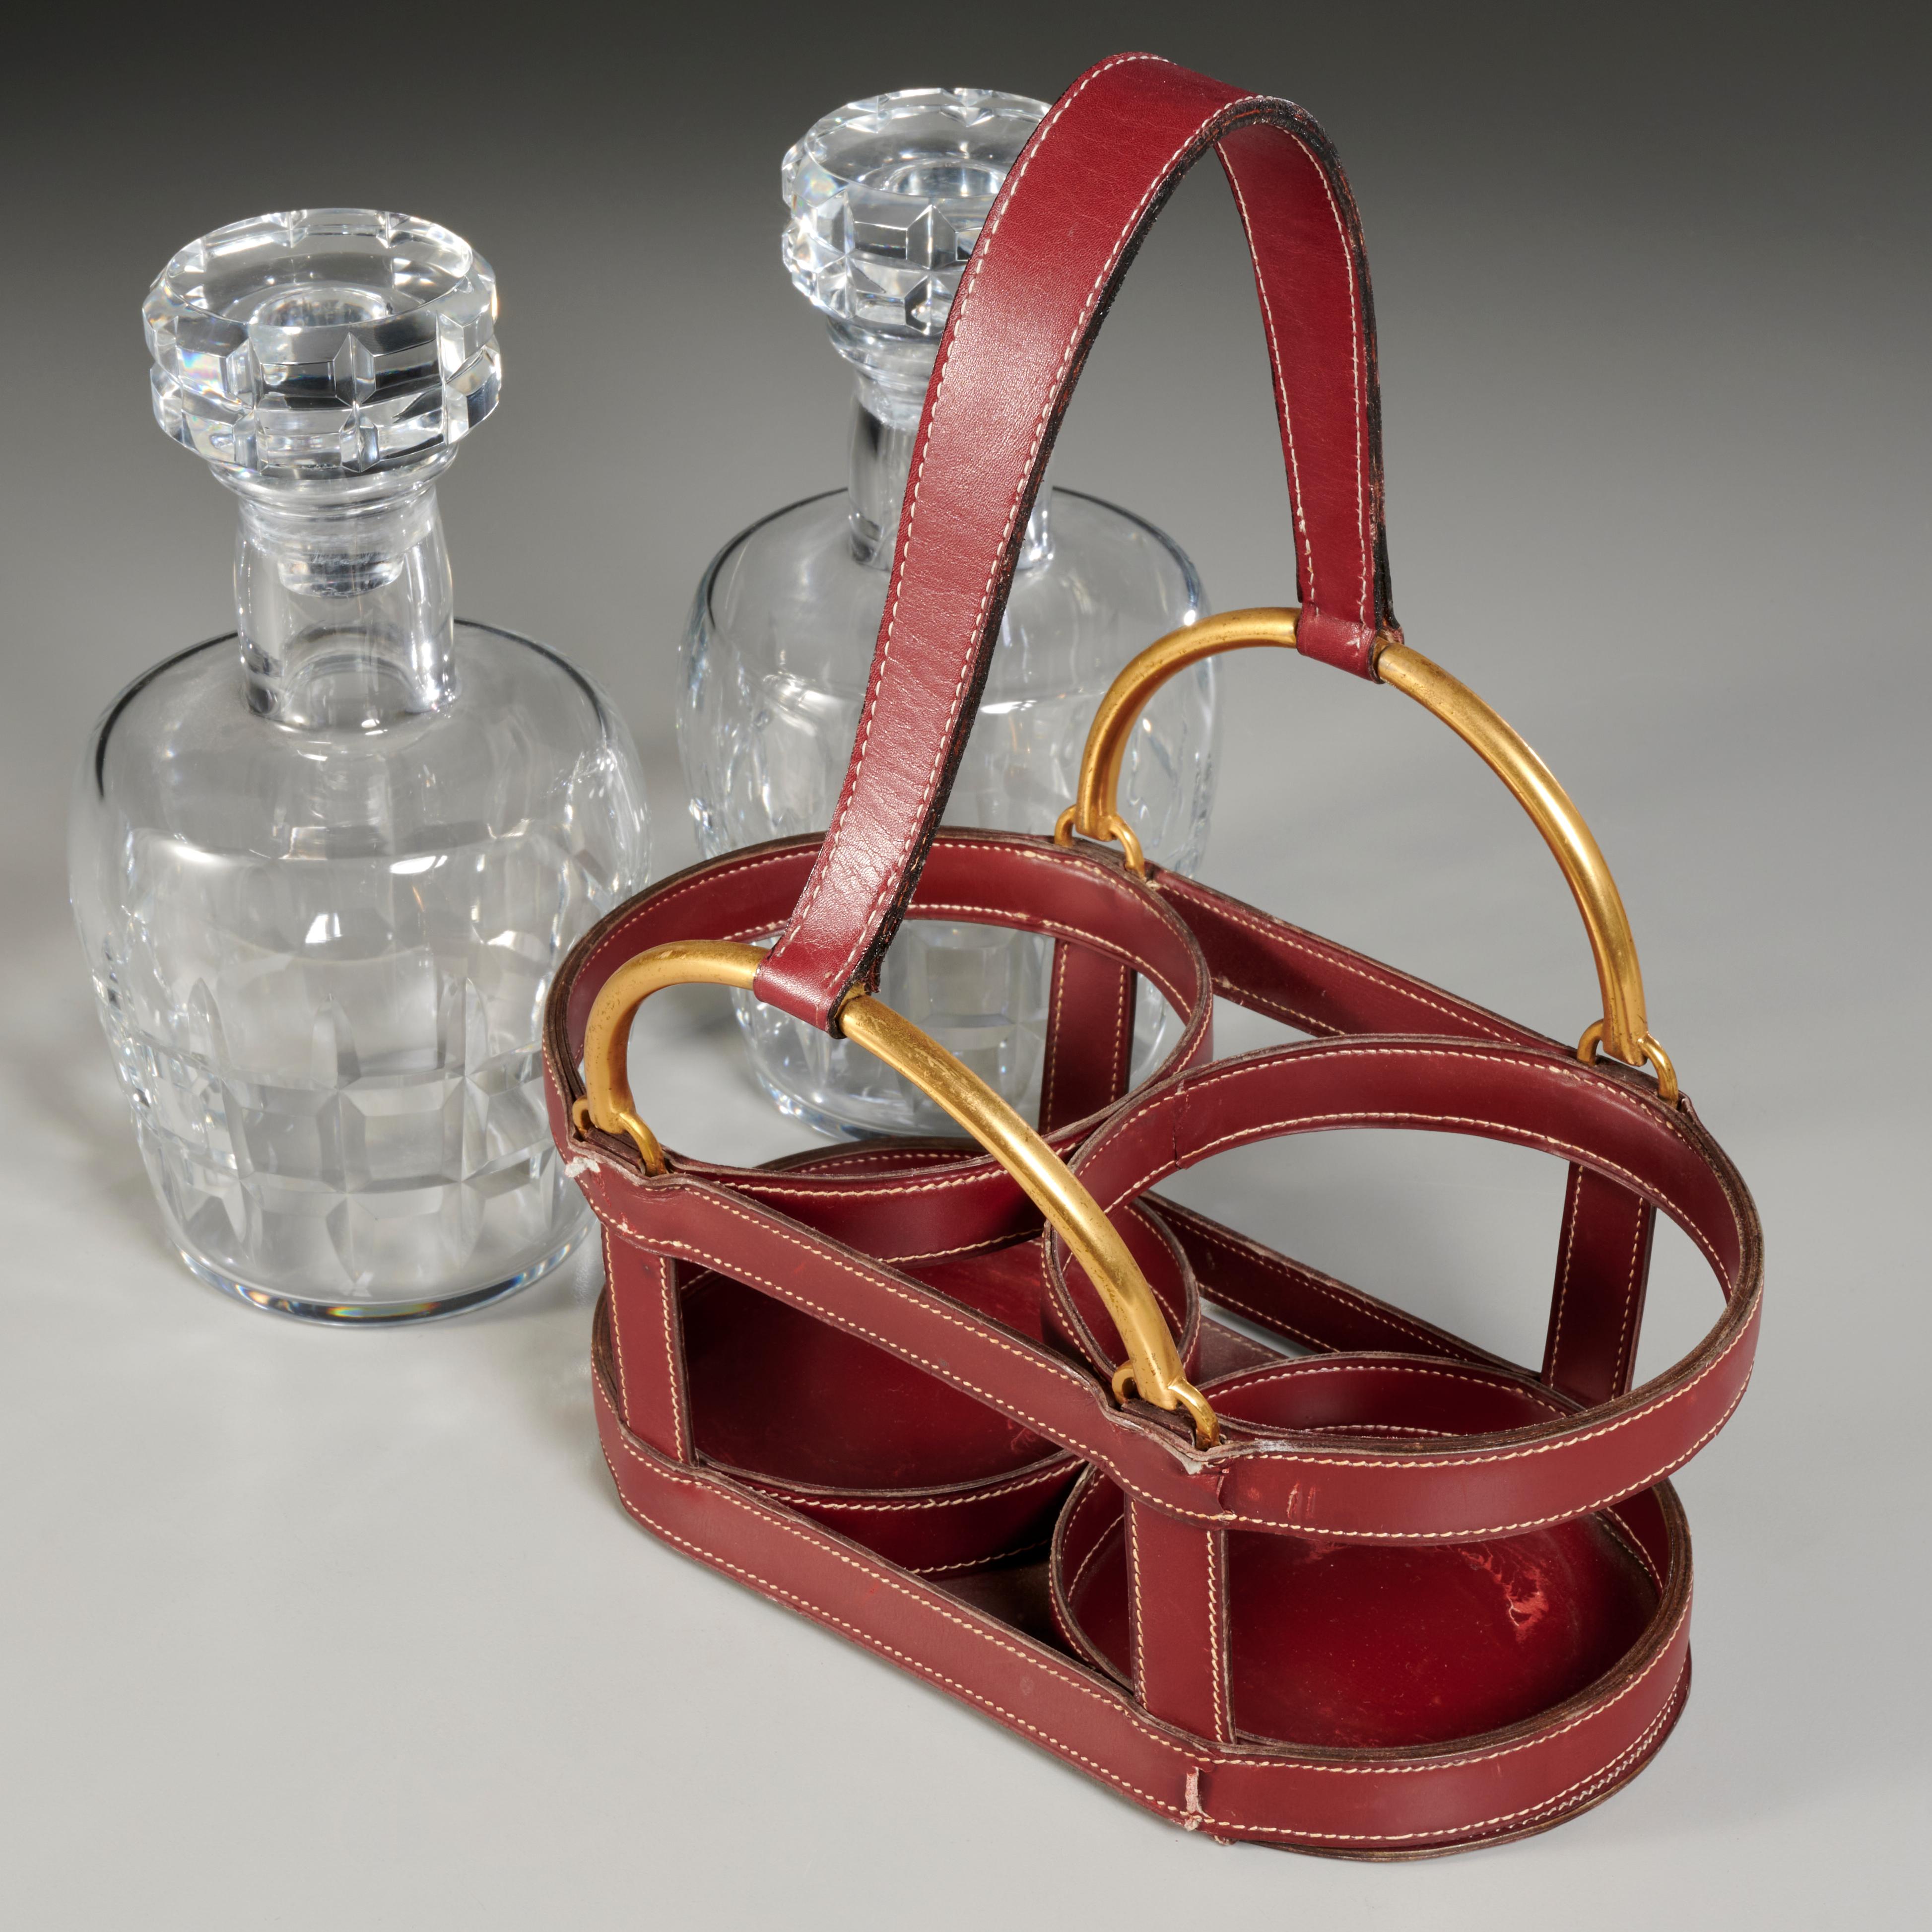 Rare red stitched leather equestrian decanter set by Jacques Adnet for Hermes: Signed: 